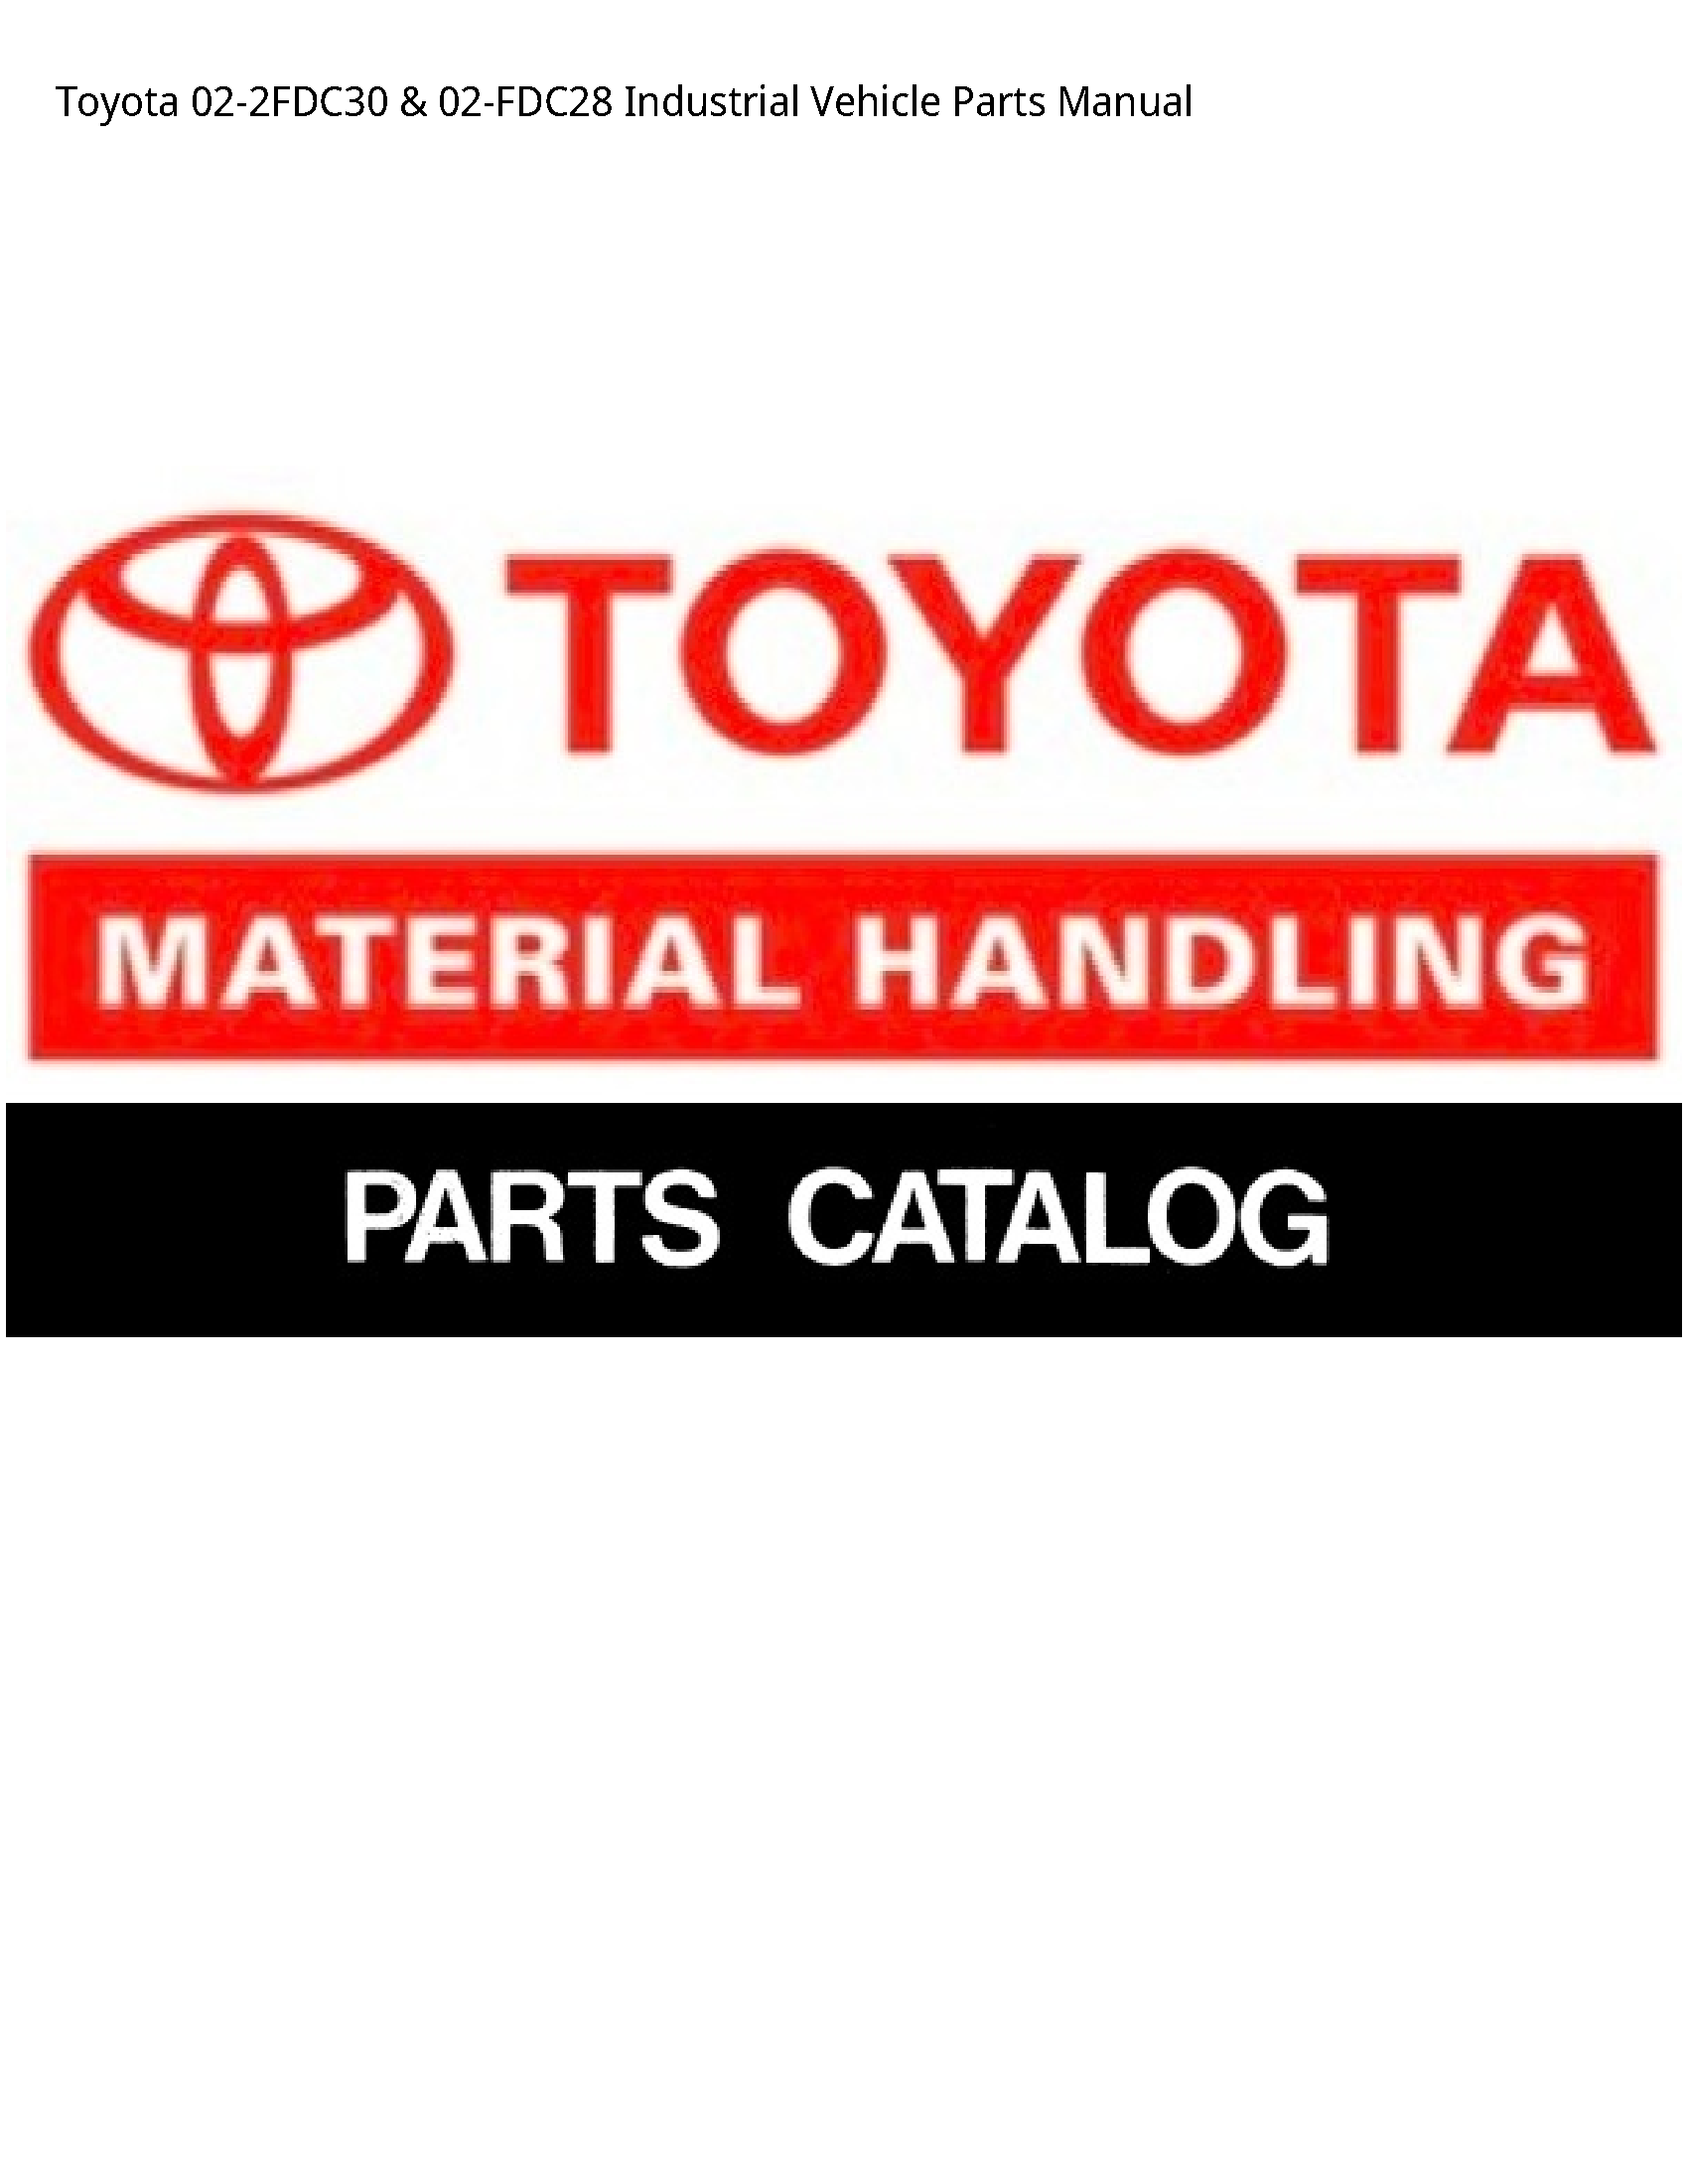 Toyota 02-2FDC30 Industrial Vehicle Parts manual